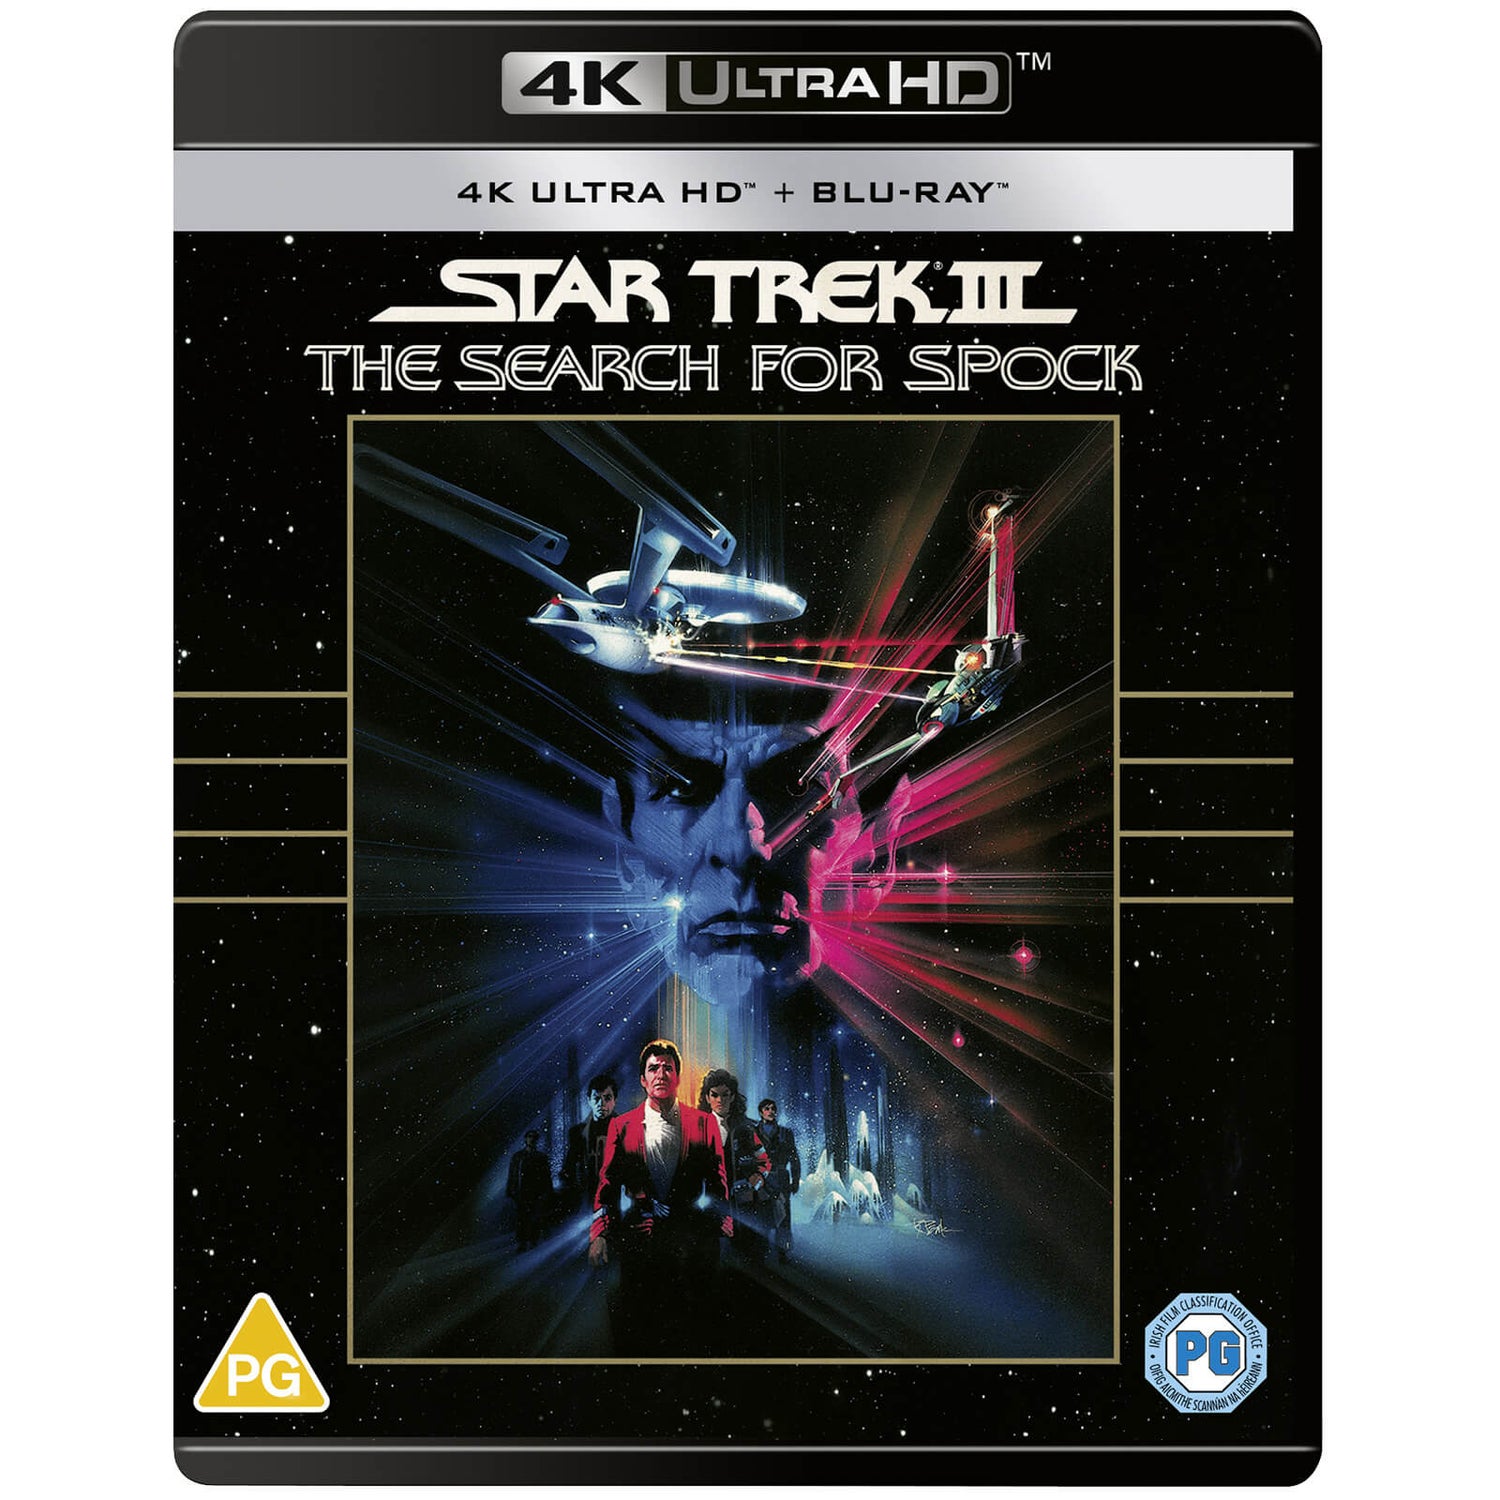 Star Trek III: The Search For Spock - 4K Ultra HD (Includes Blu-ray)